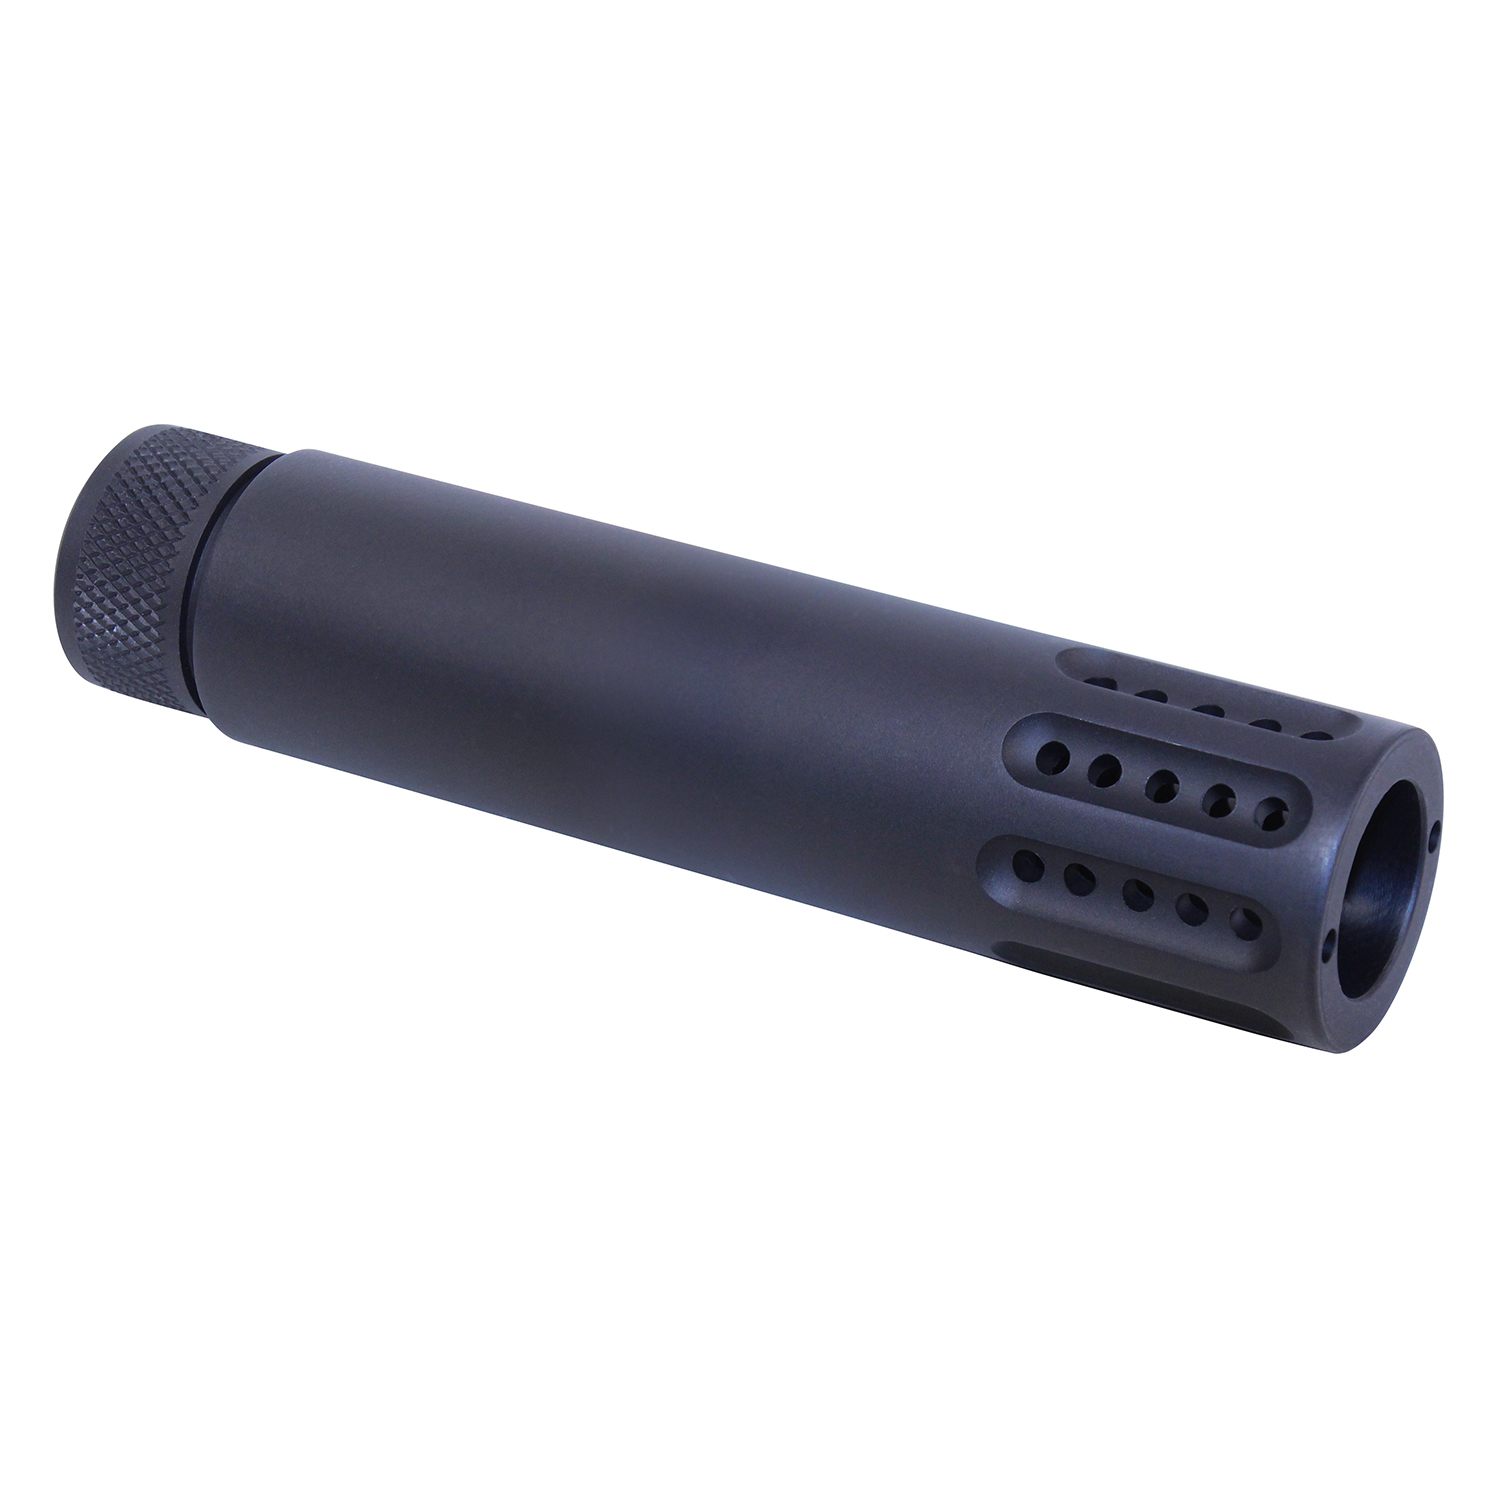 Anodized black barrel shroud with muzzle brake for .50 Beowulf